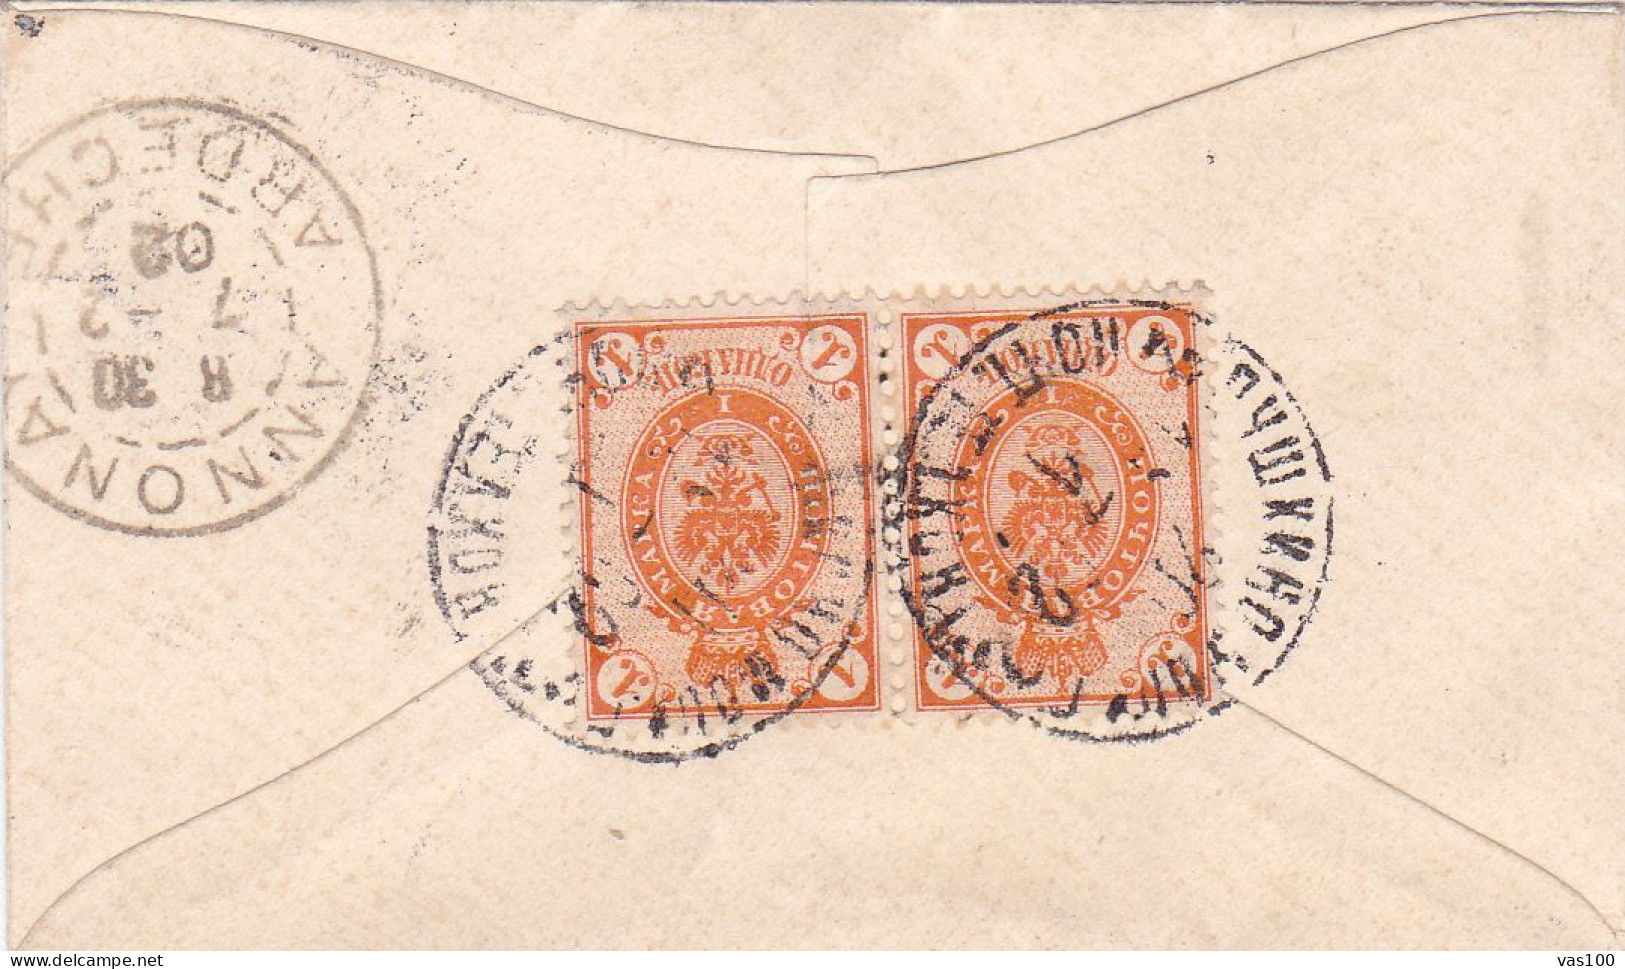 RUSSIA - Postal History - COVER To FRANCE 1902 ARDECHE - Covers & Documents